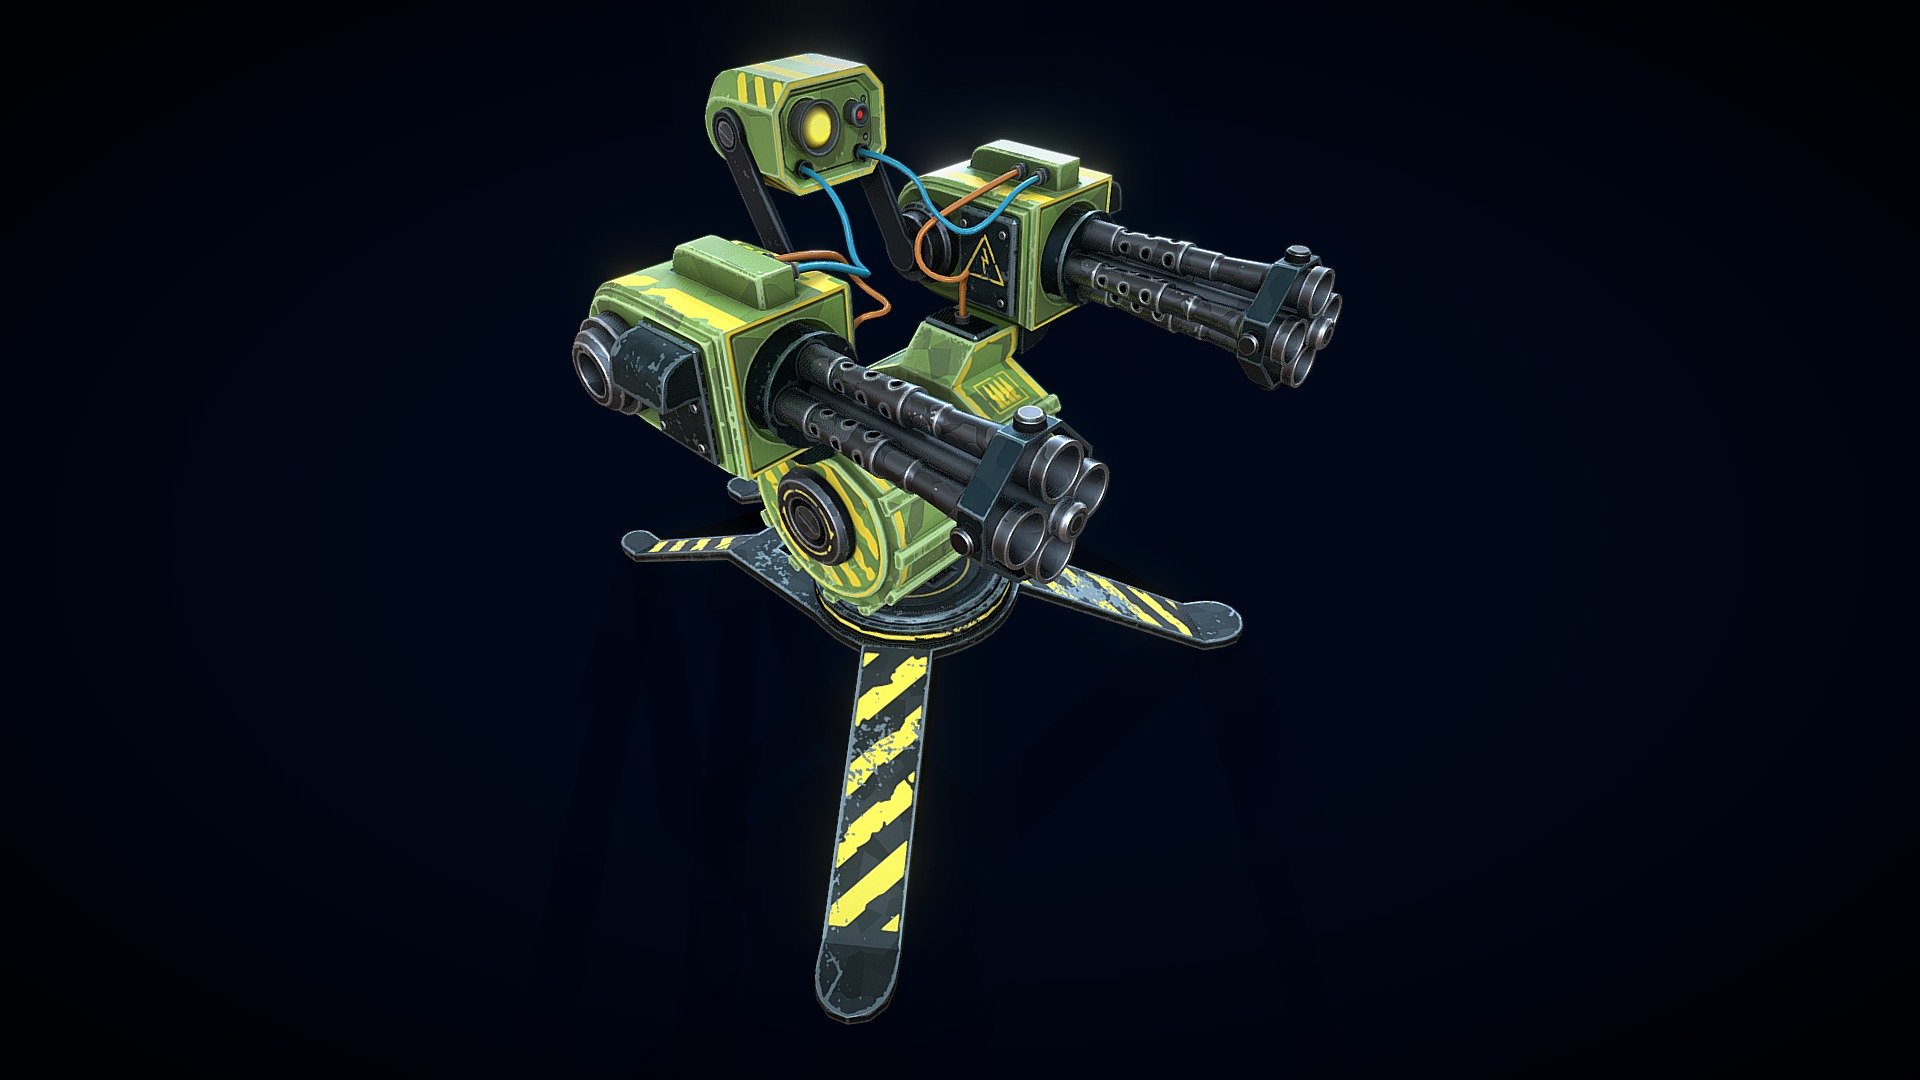 Low-poly 3D model of the Stylized Sentry Gun doesn't contain any n-gons and has optimal topology. This model has 2K textures 3d model